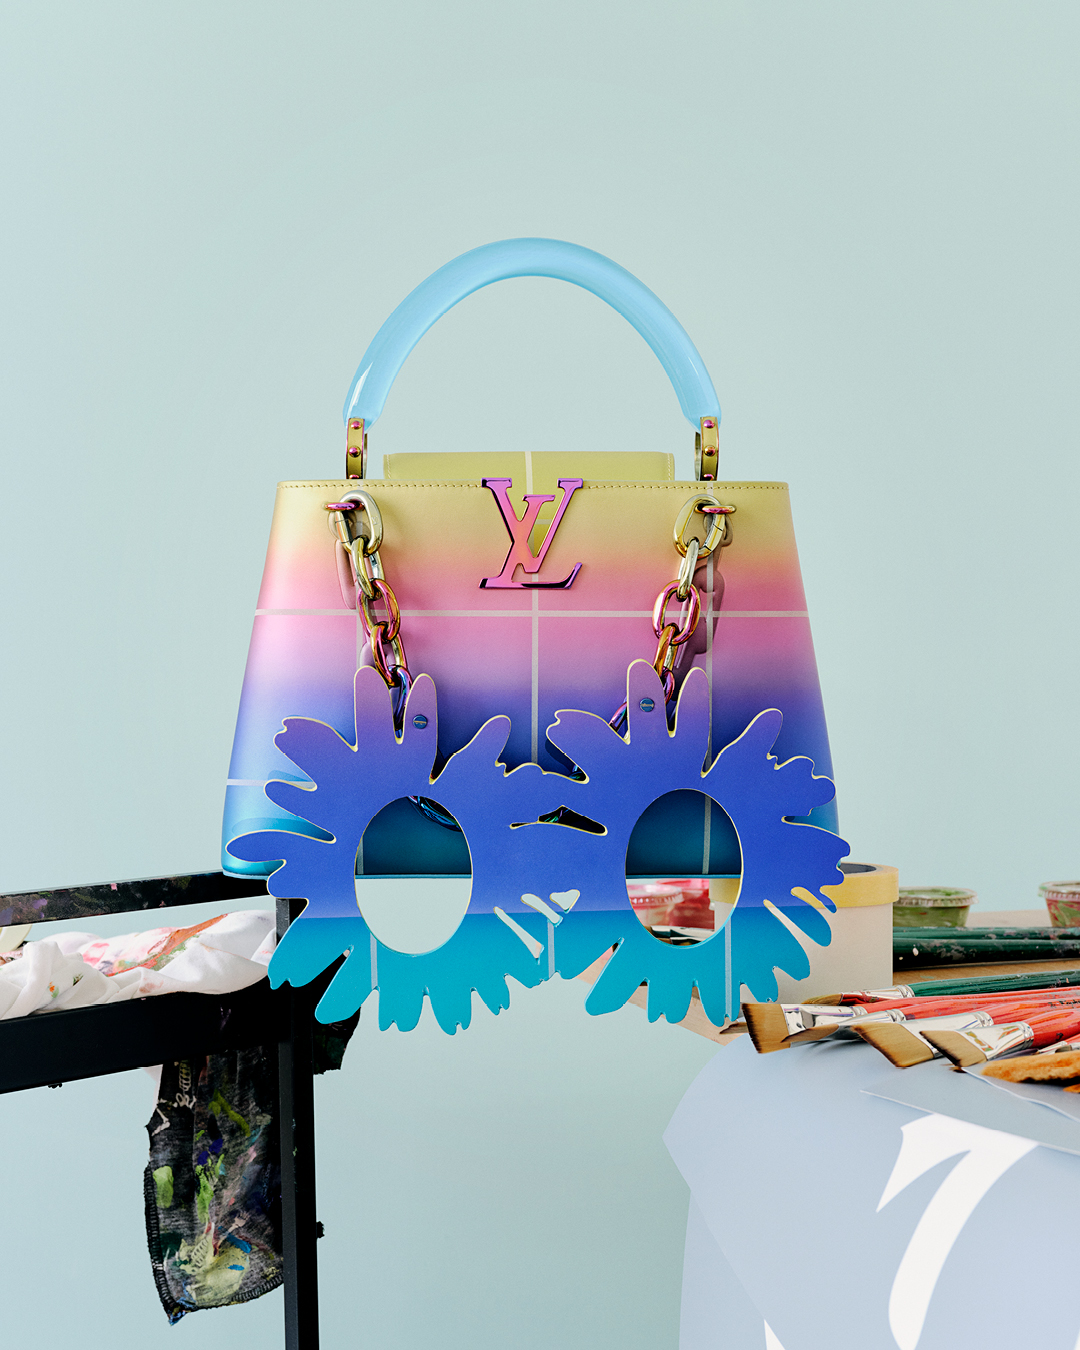 The Internet is Obsessed with the New Louis Vuitton Glow-in-the